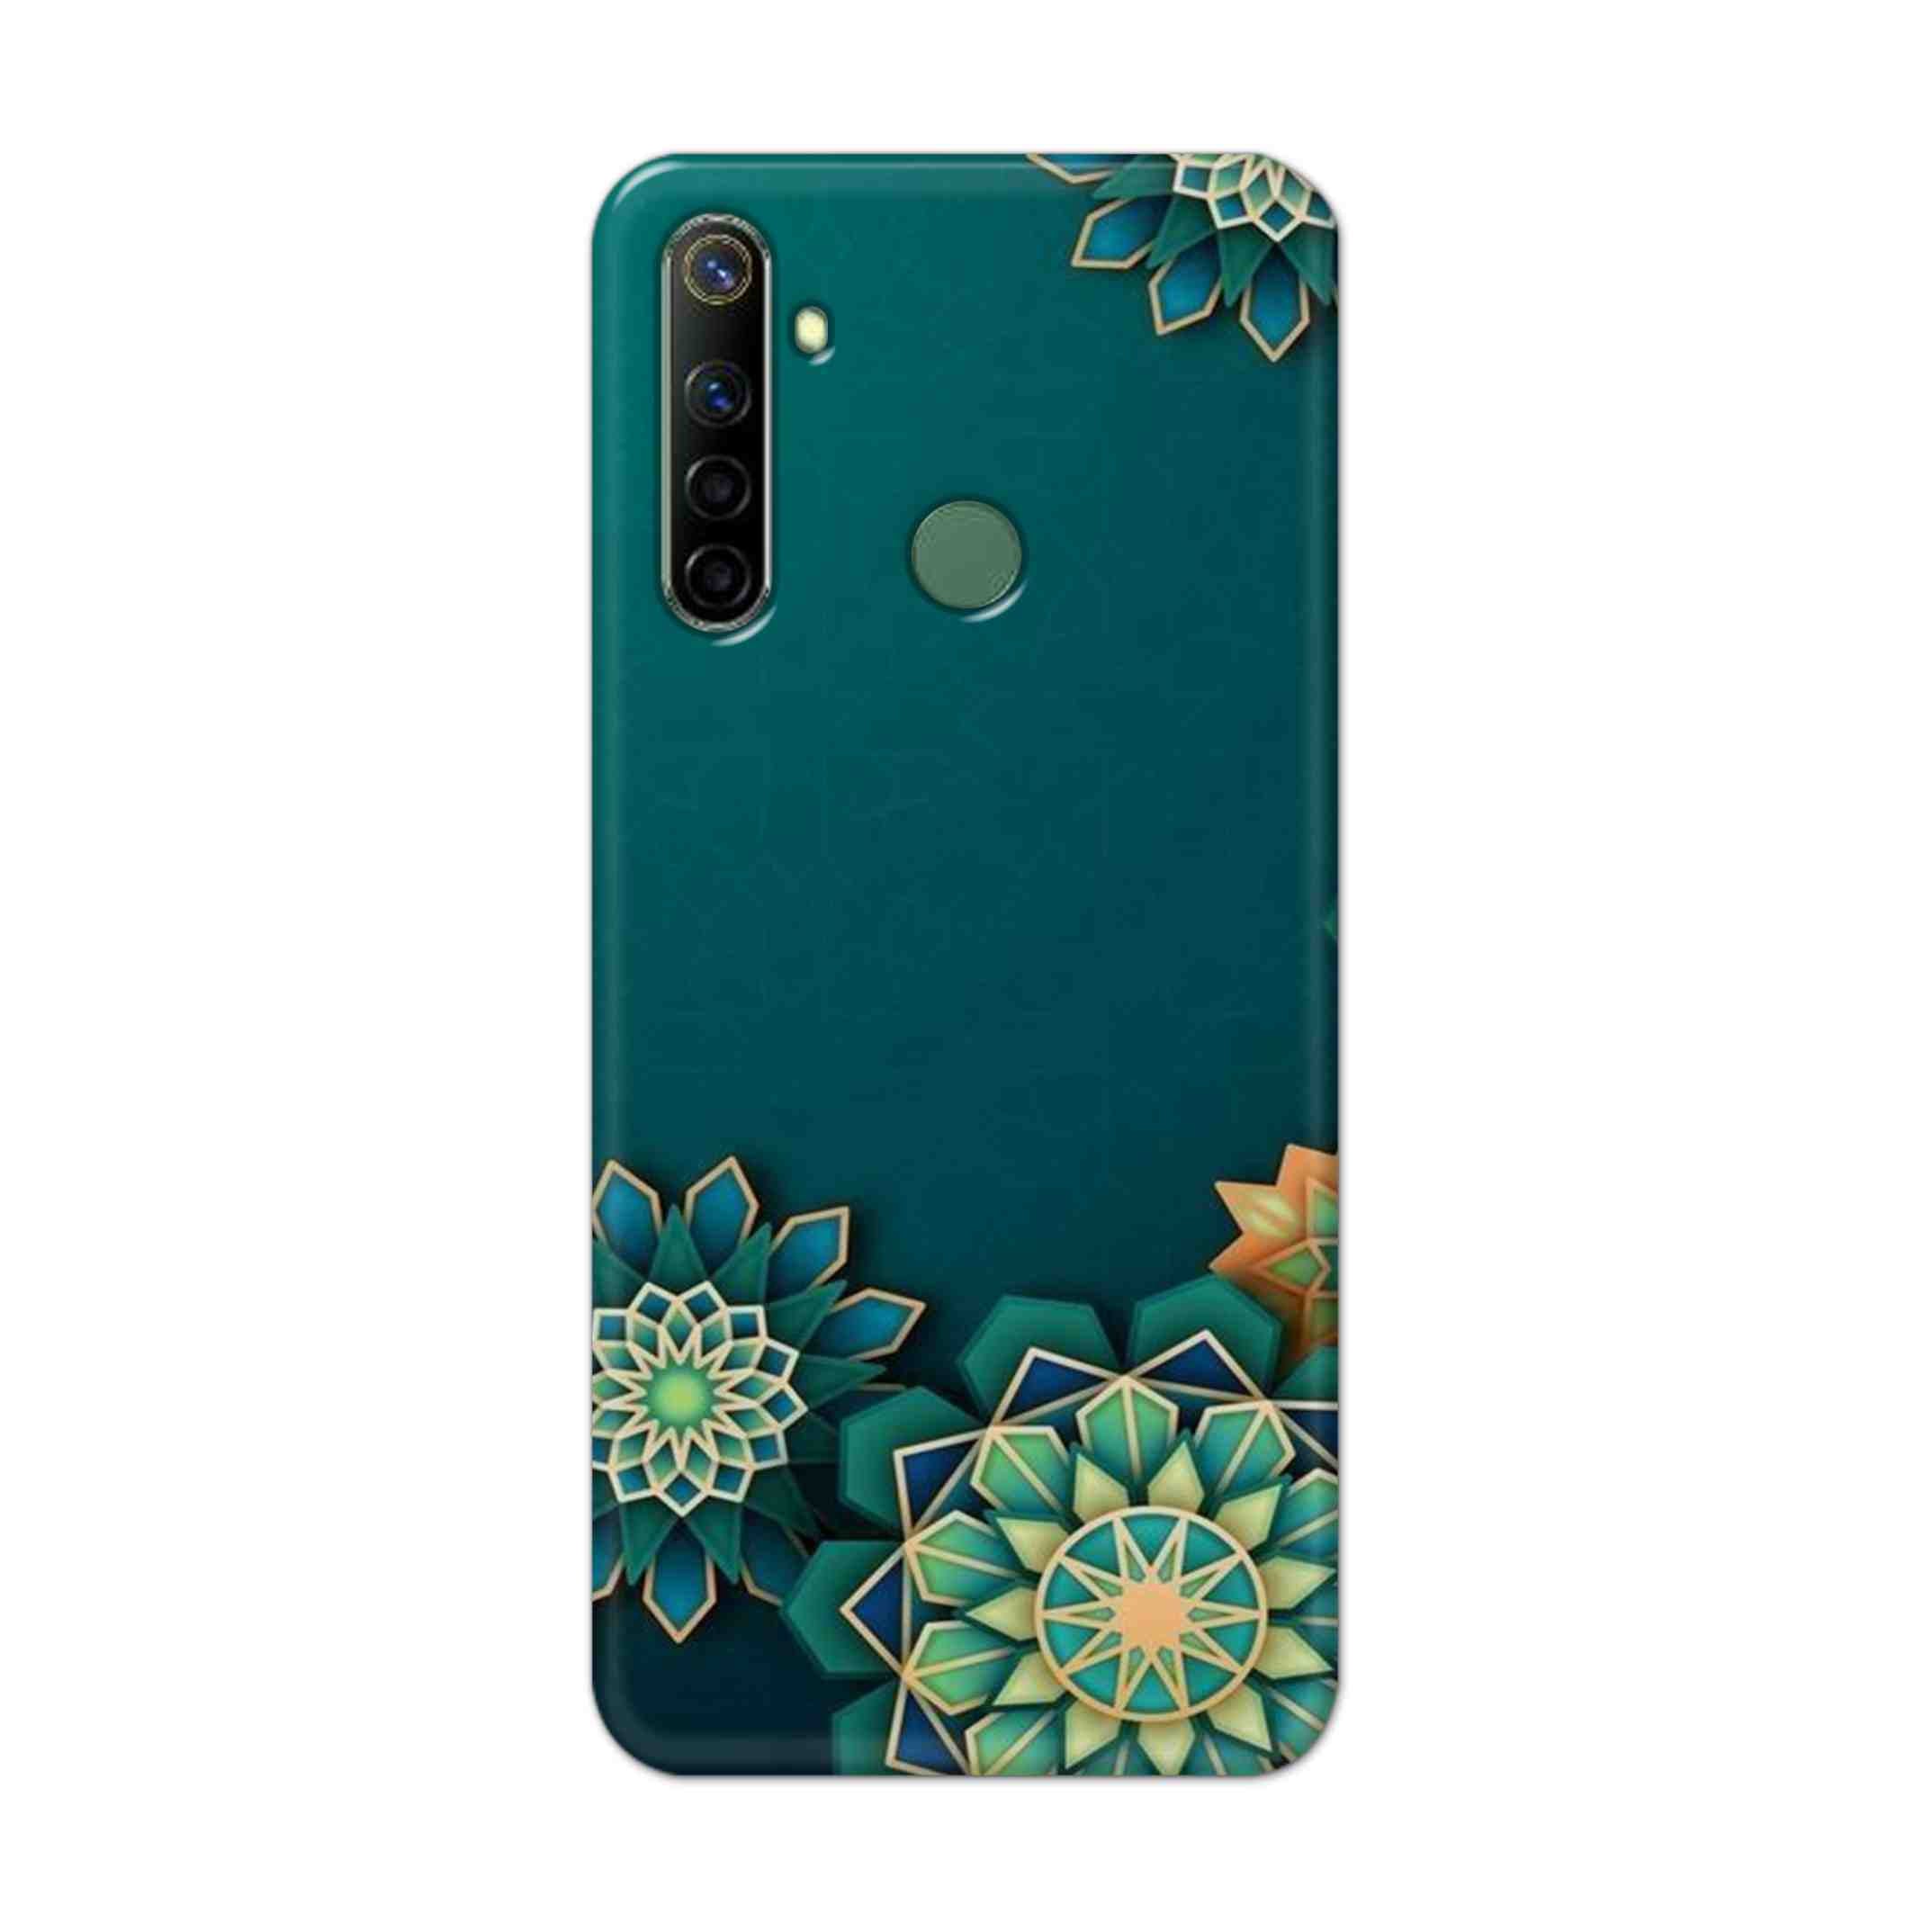 Buy Green Flower Hard Back Mobile Phone Case Cover For Realme Narzo 10a Online